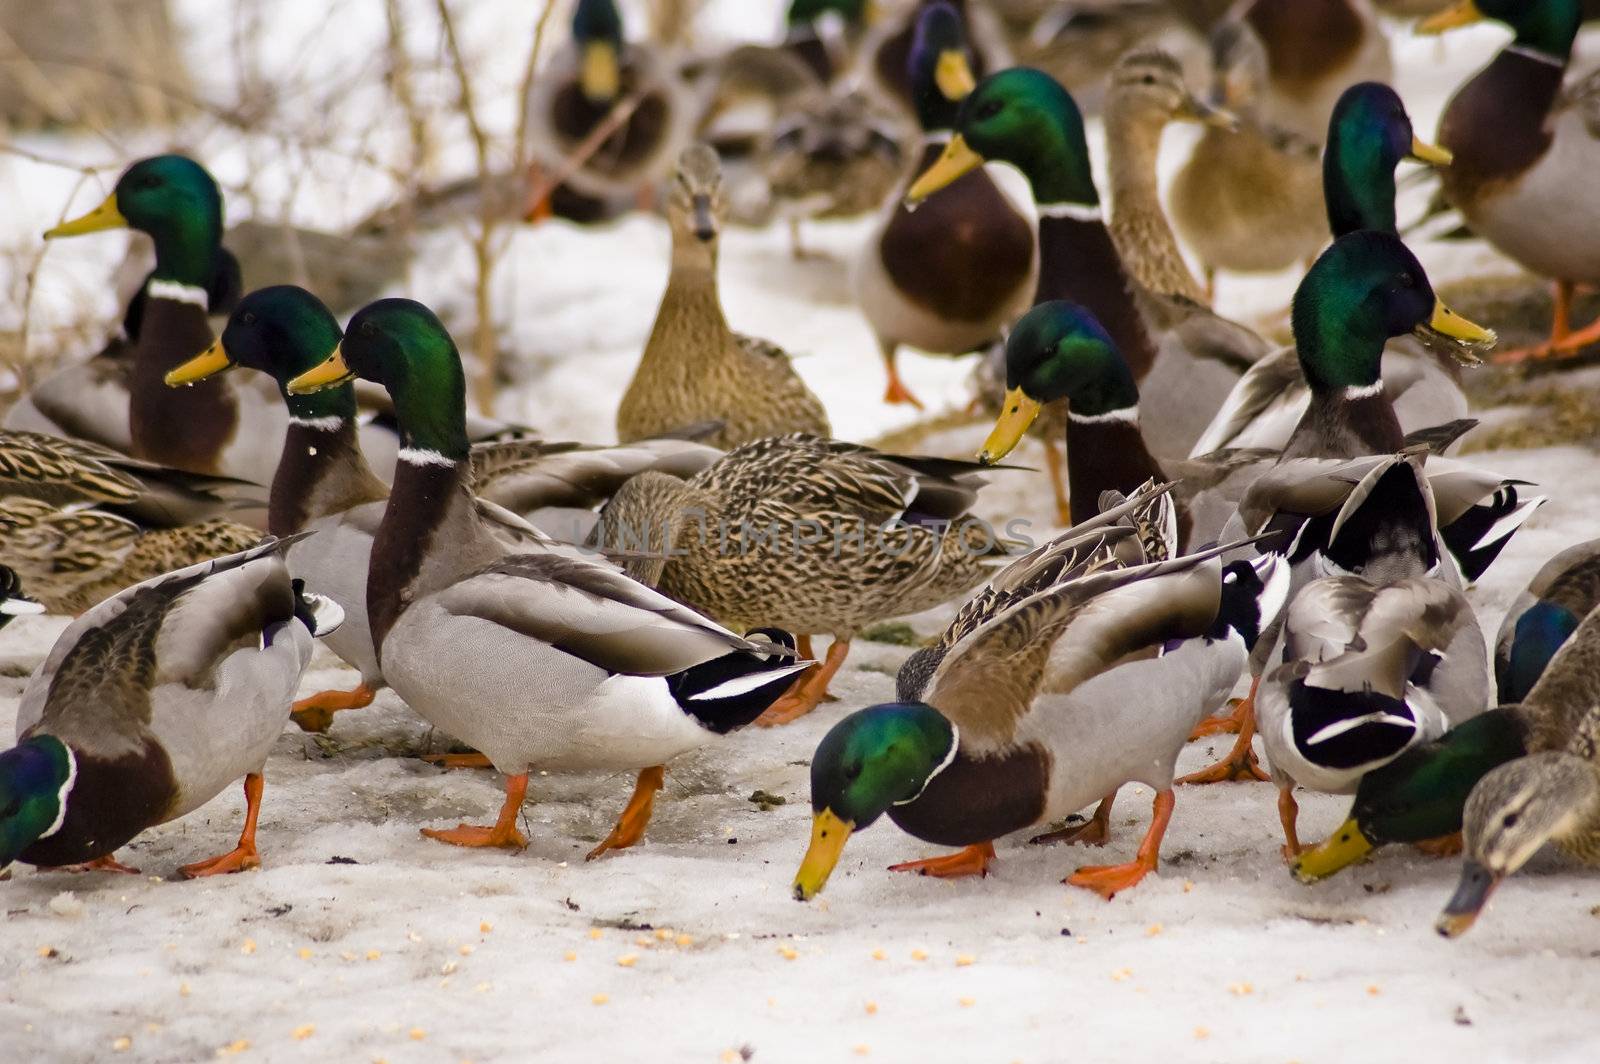 a group of wild ducks in their natural habitat